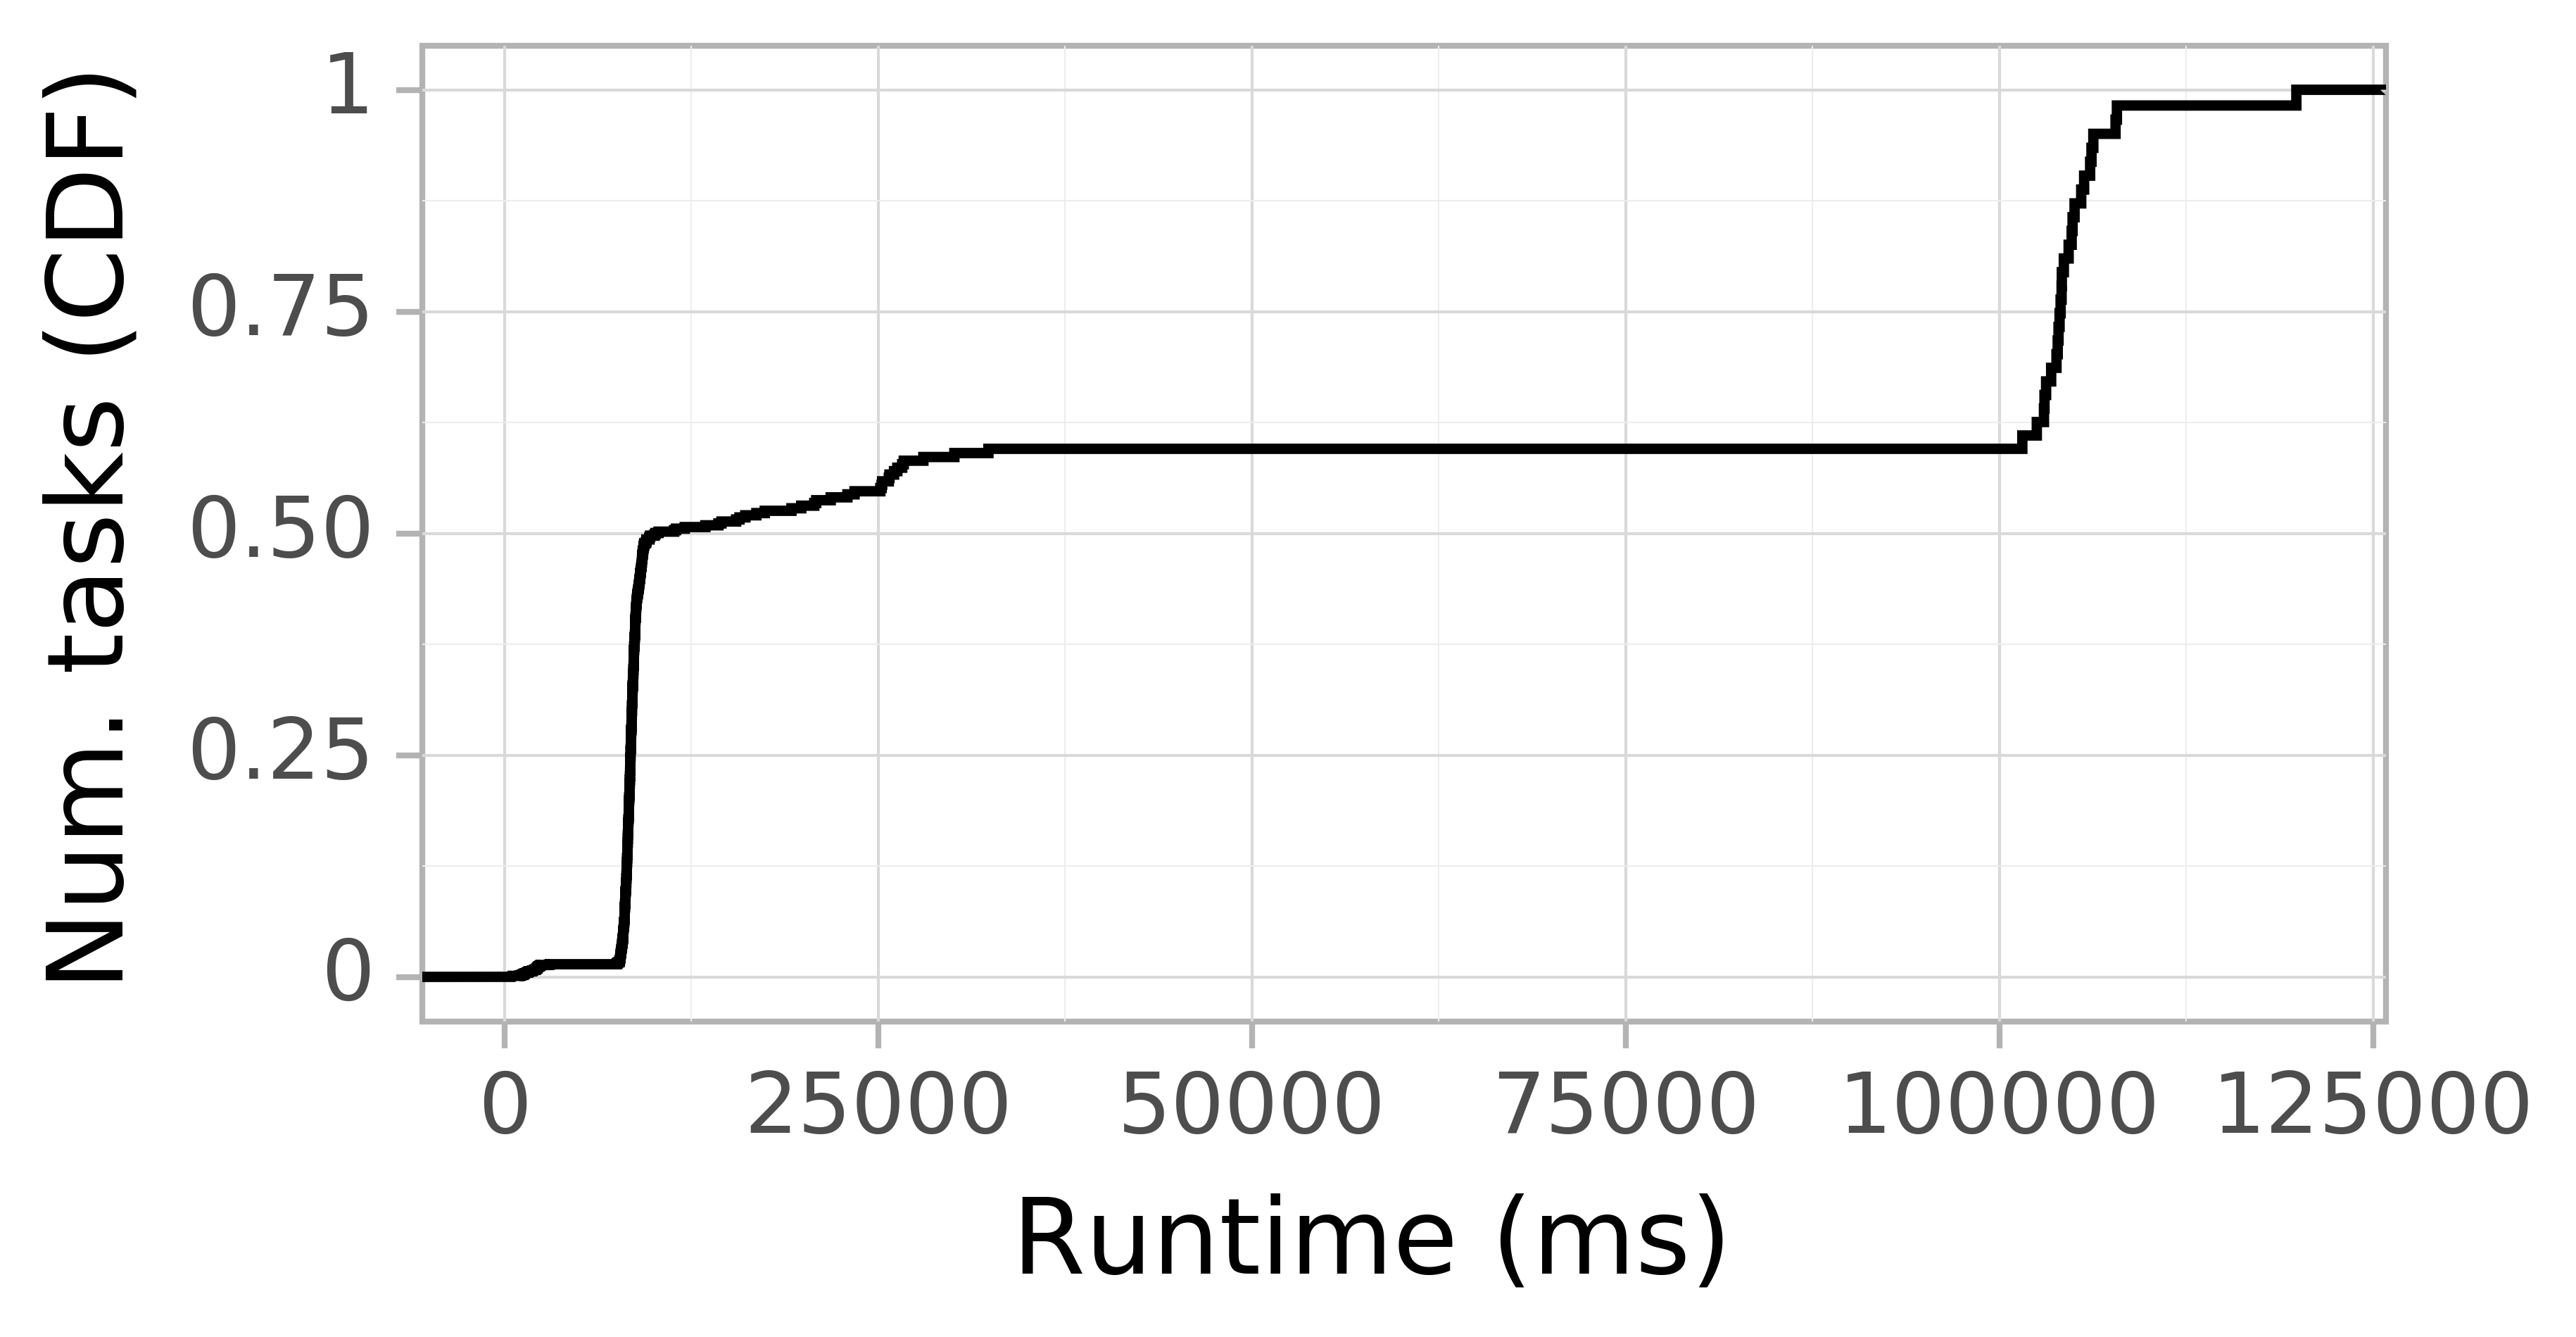 Task runtime CDF graph for the askalon-new_ee29 trace.